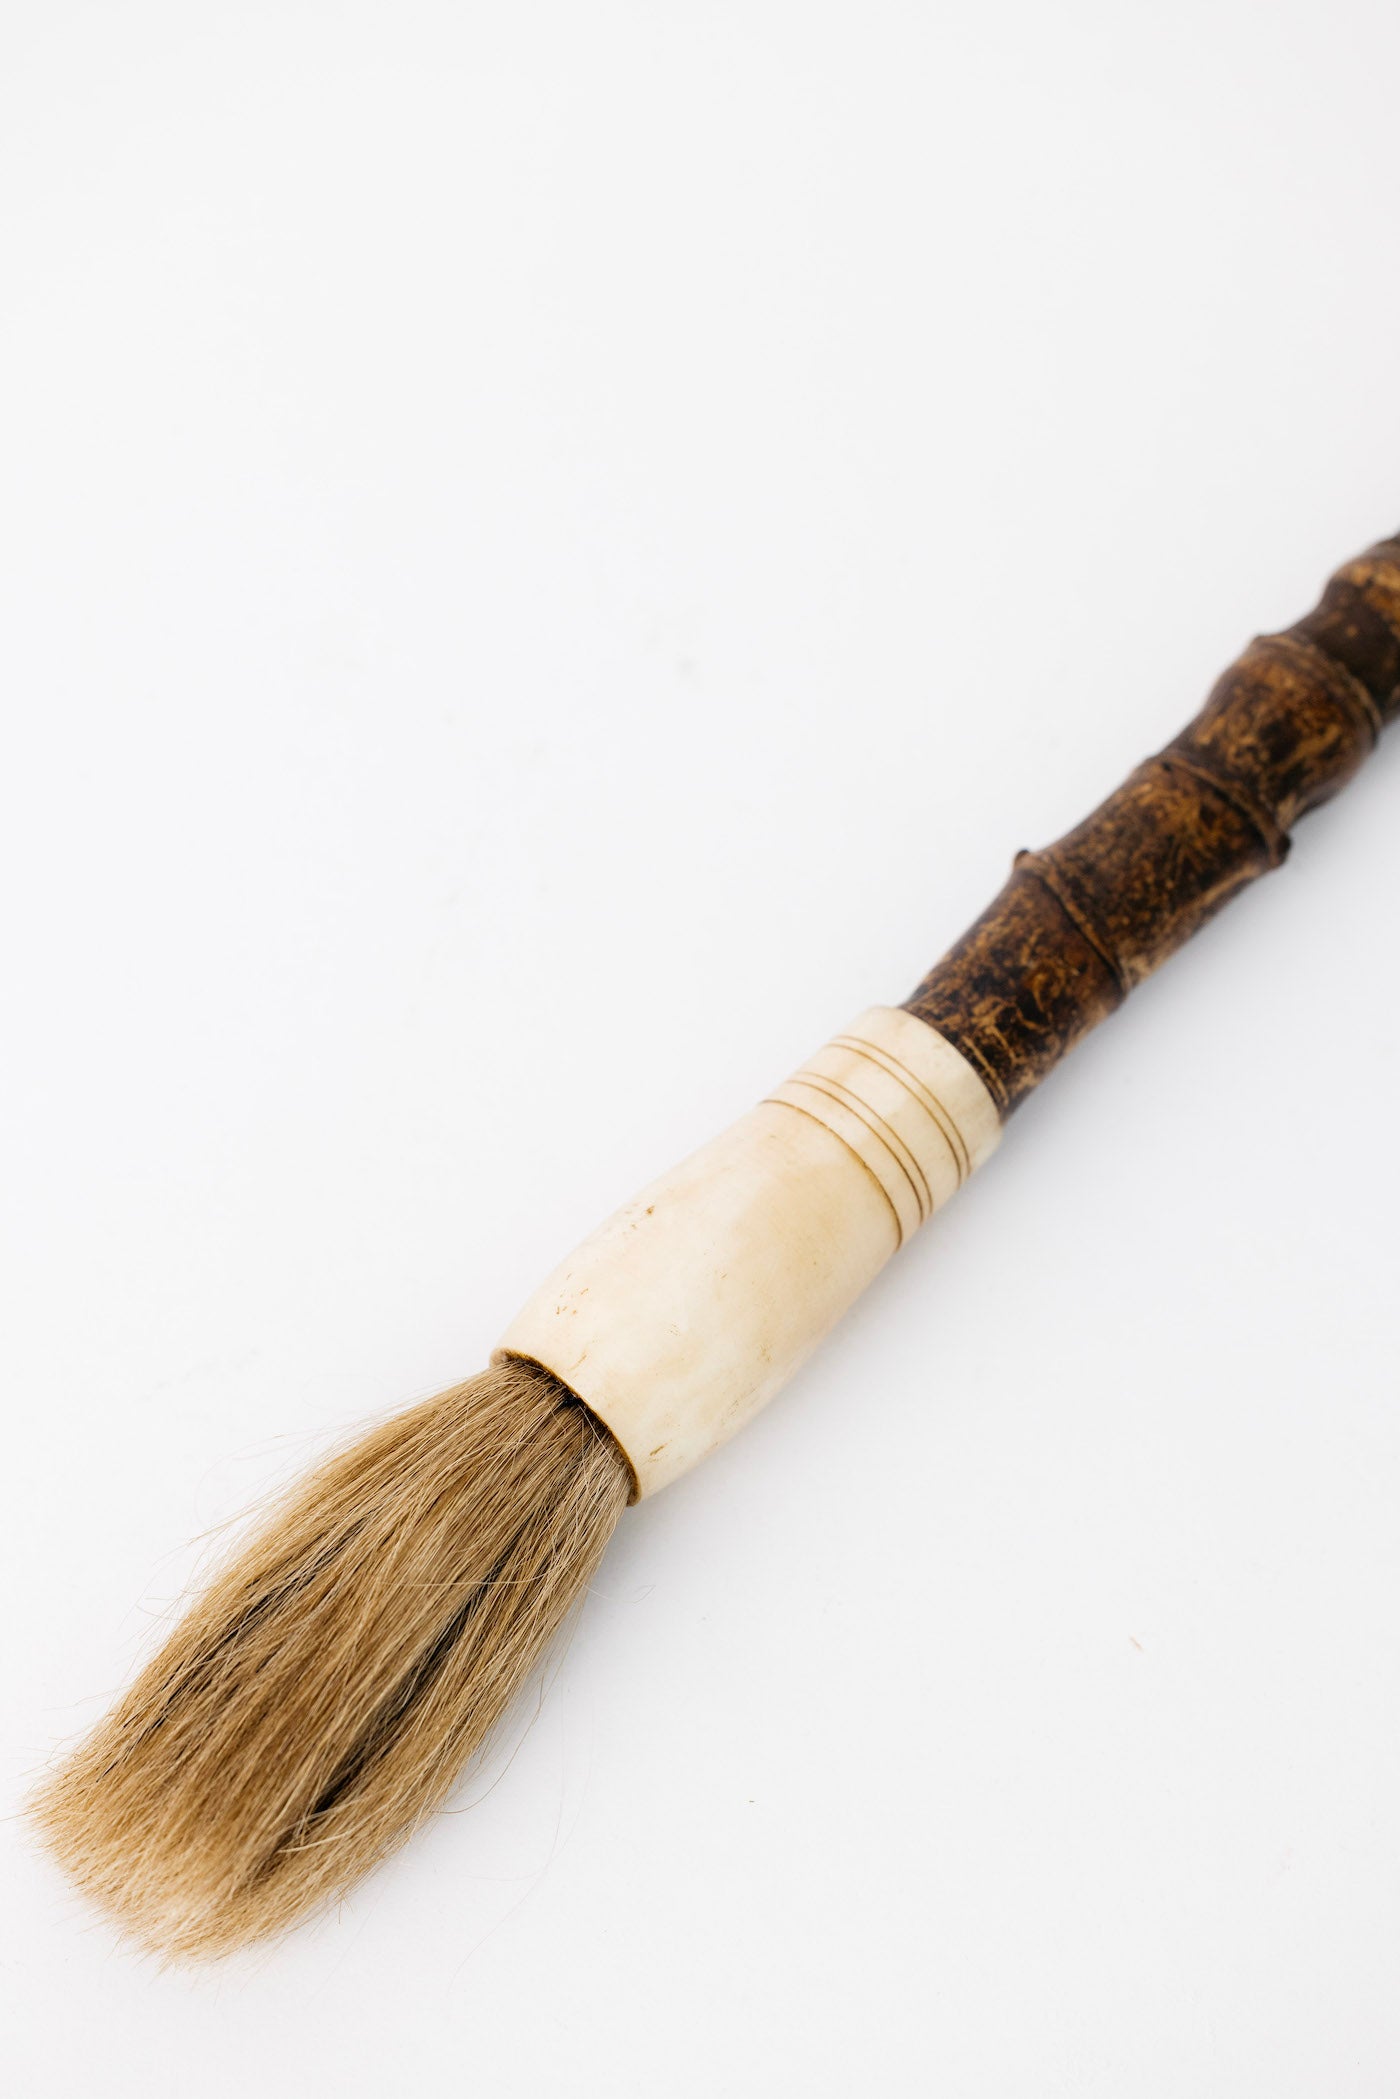 Imperial Calligraphy Brush - Wood - THELIFESTYLEDCO Shop